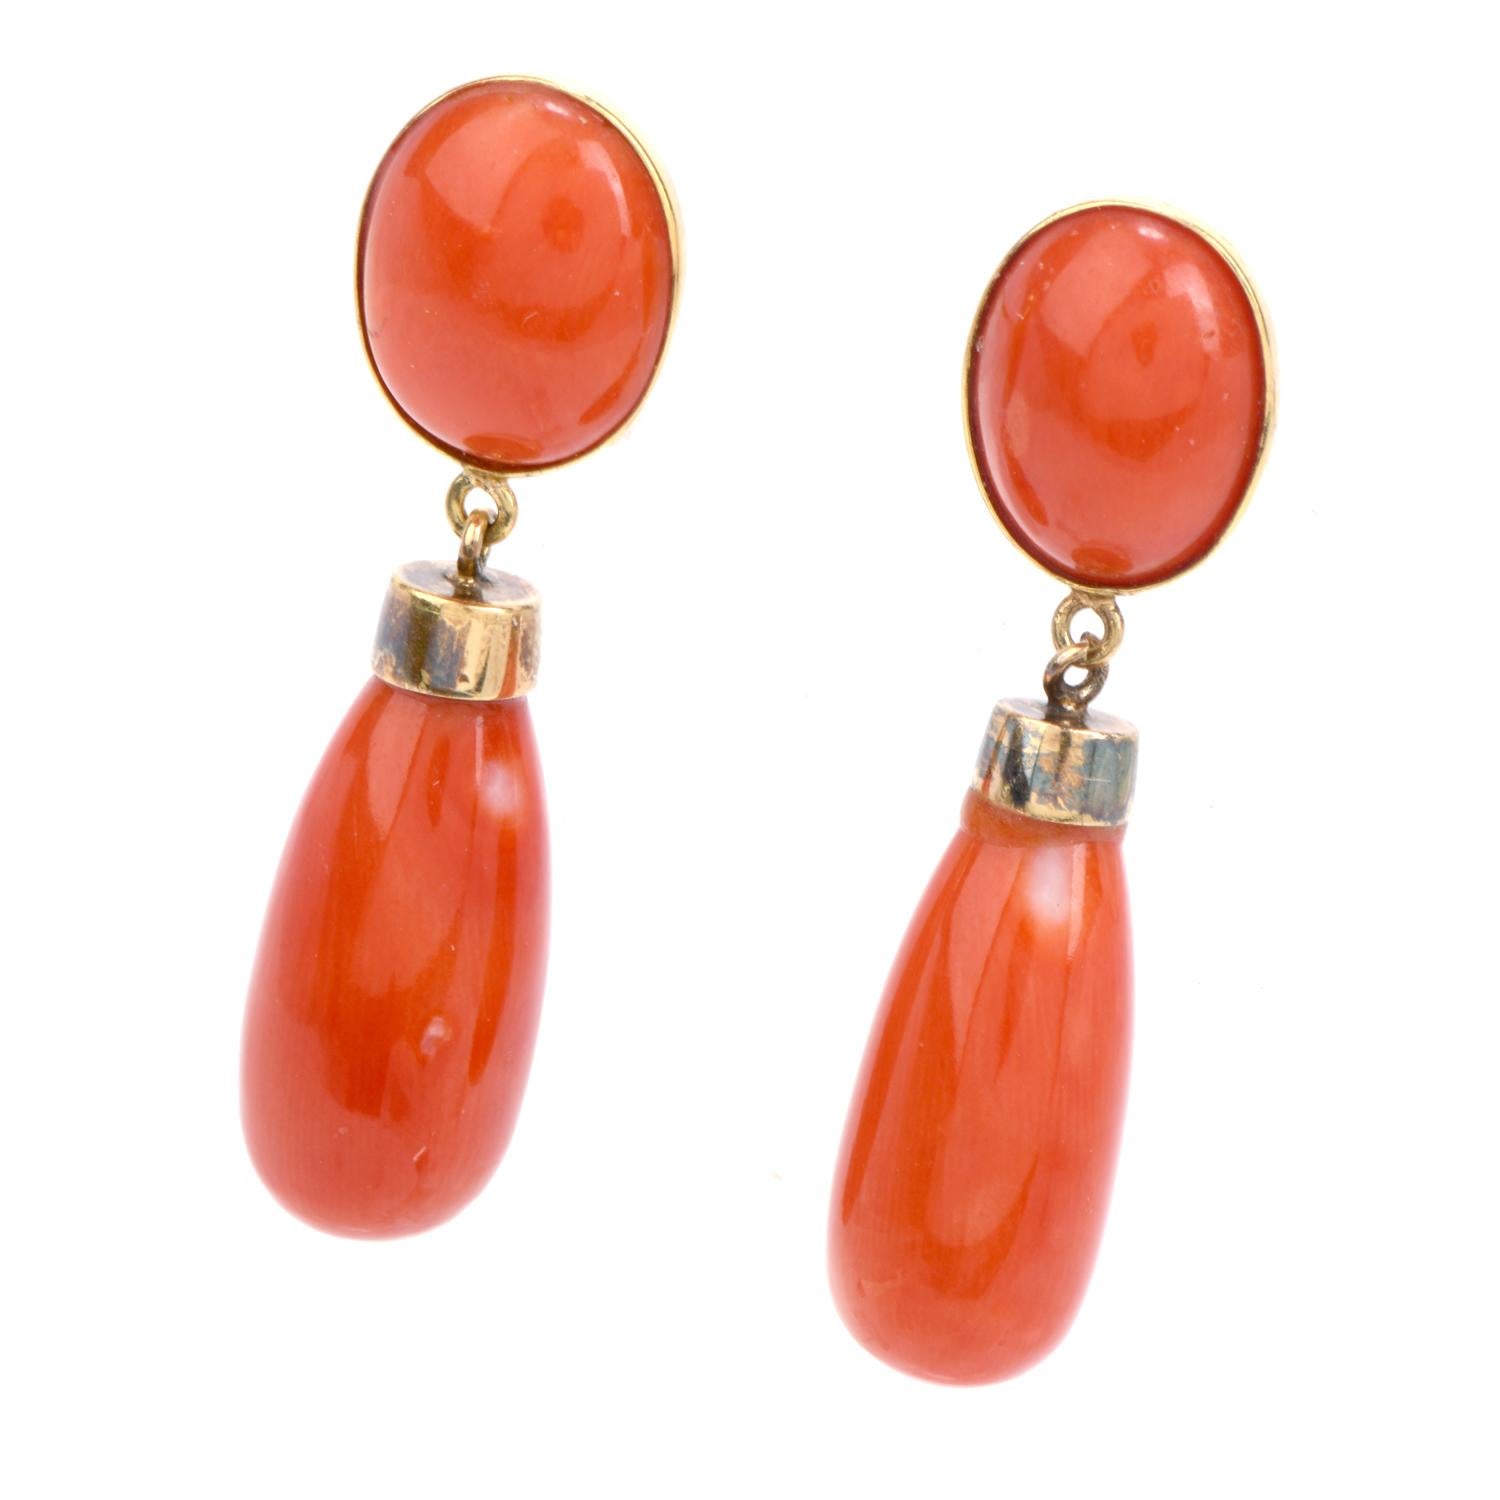 Decorate yourself with these warm and inviting Vintage Red Coral 18K Gold Drop Dangle Earrings!  These elegant earrings have two natural red coral oval cabochons near the top, and have two long drop shaped cabochons dangling at the bottom.  They are